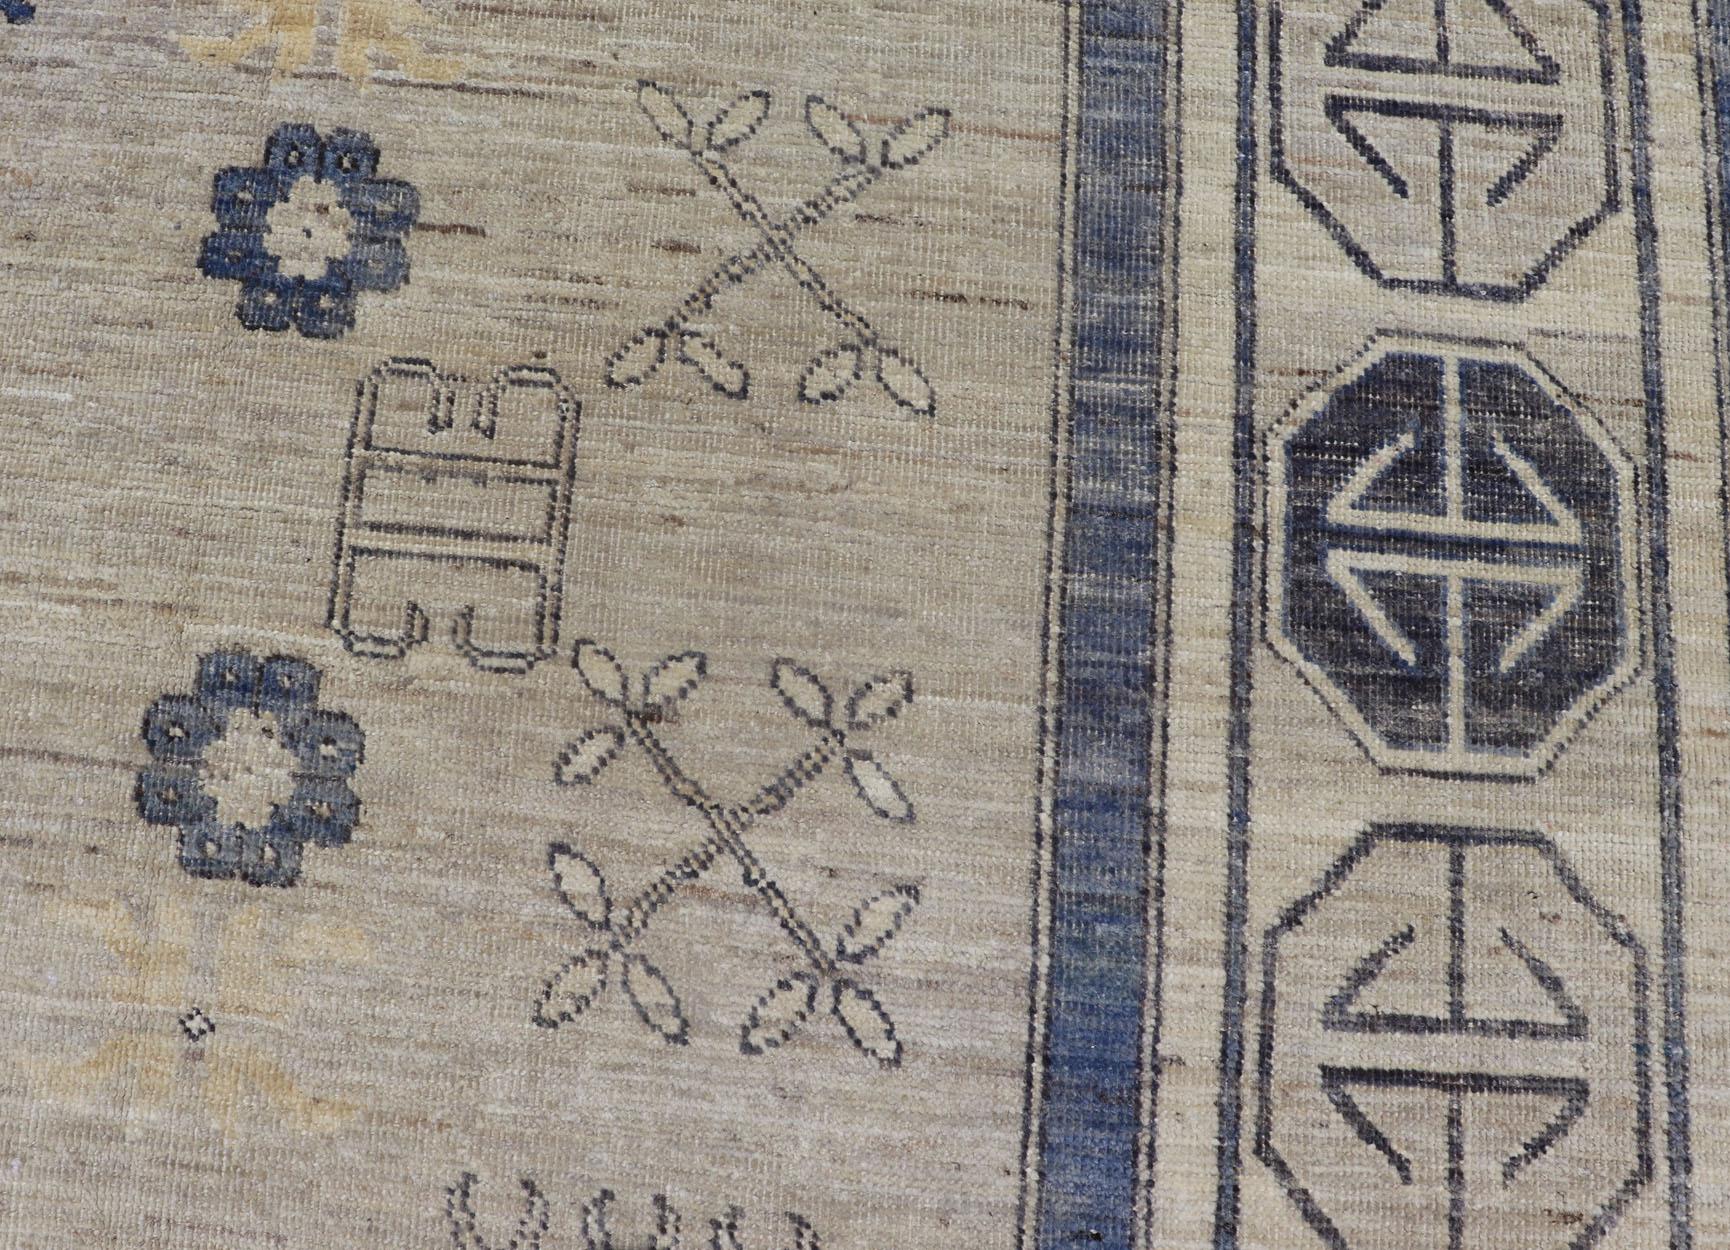 Khotan Design Rug with Geometric Medallions in Royal Blue and Cream In Excellent Condition For Sale In Atlanta, GA